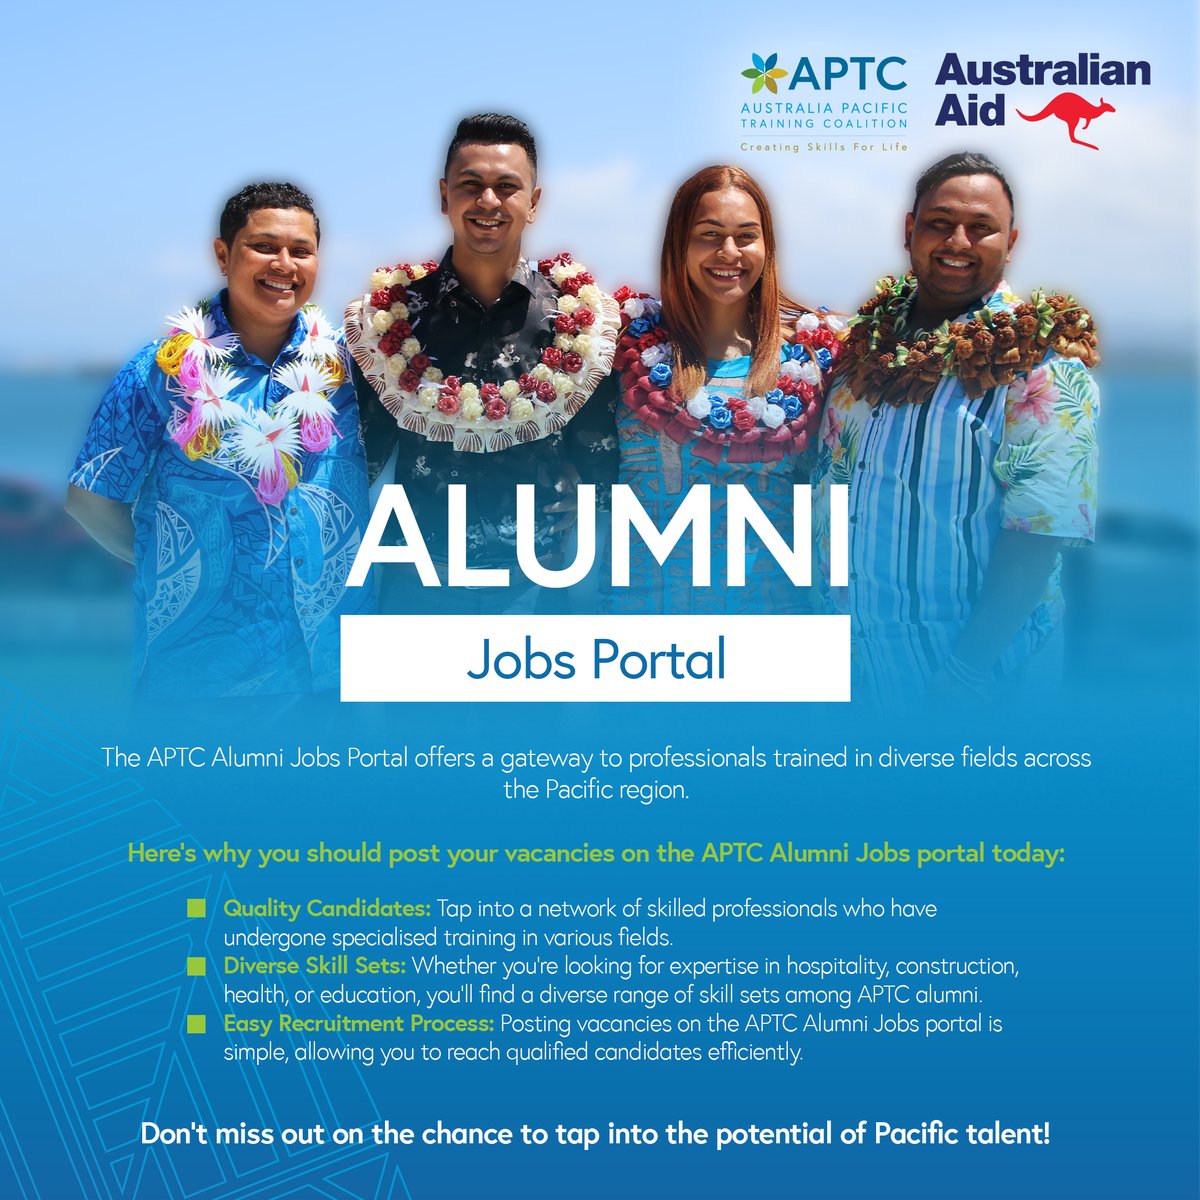 𝐀𝐭𝐭𝐞𝐧𝐭𝐢𝐨𝐧 𝐄𝐦𝐩𝐥𝐨𝐲𝐞𝐫𝐬 📢 Gain access to a pool of talented individuals who have received quality training & education through APTC. Post your vacancies on the 𝐀𝐏𝐓𝐂 𝐀𝐥𝐮𝐦𝐧𝐢 𝐉𝐨𝐛𝐬 𝐩𝐨𝐫𝐭𝐚𝐥 today. Please visit 👇alumnijobs.aptc.edu.au/Account/Login.…